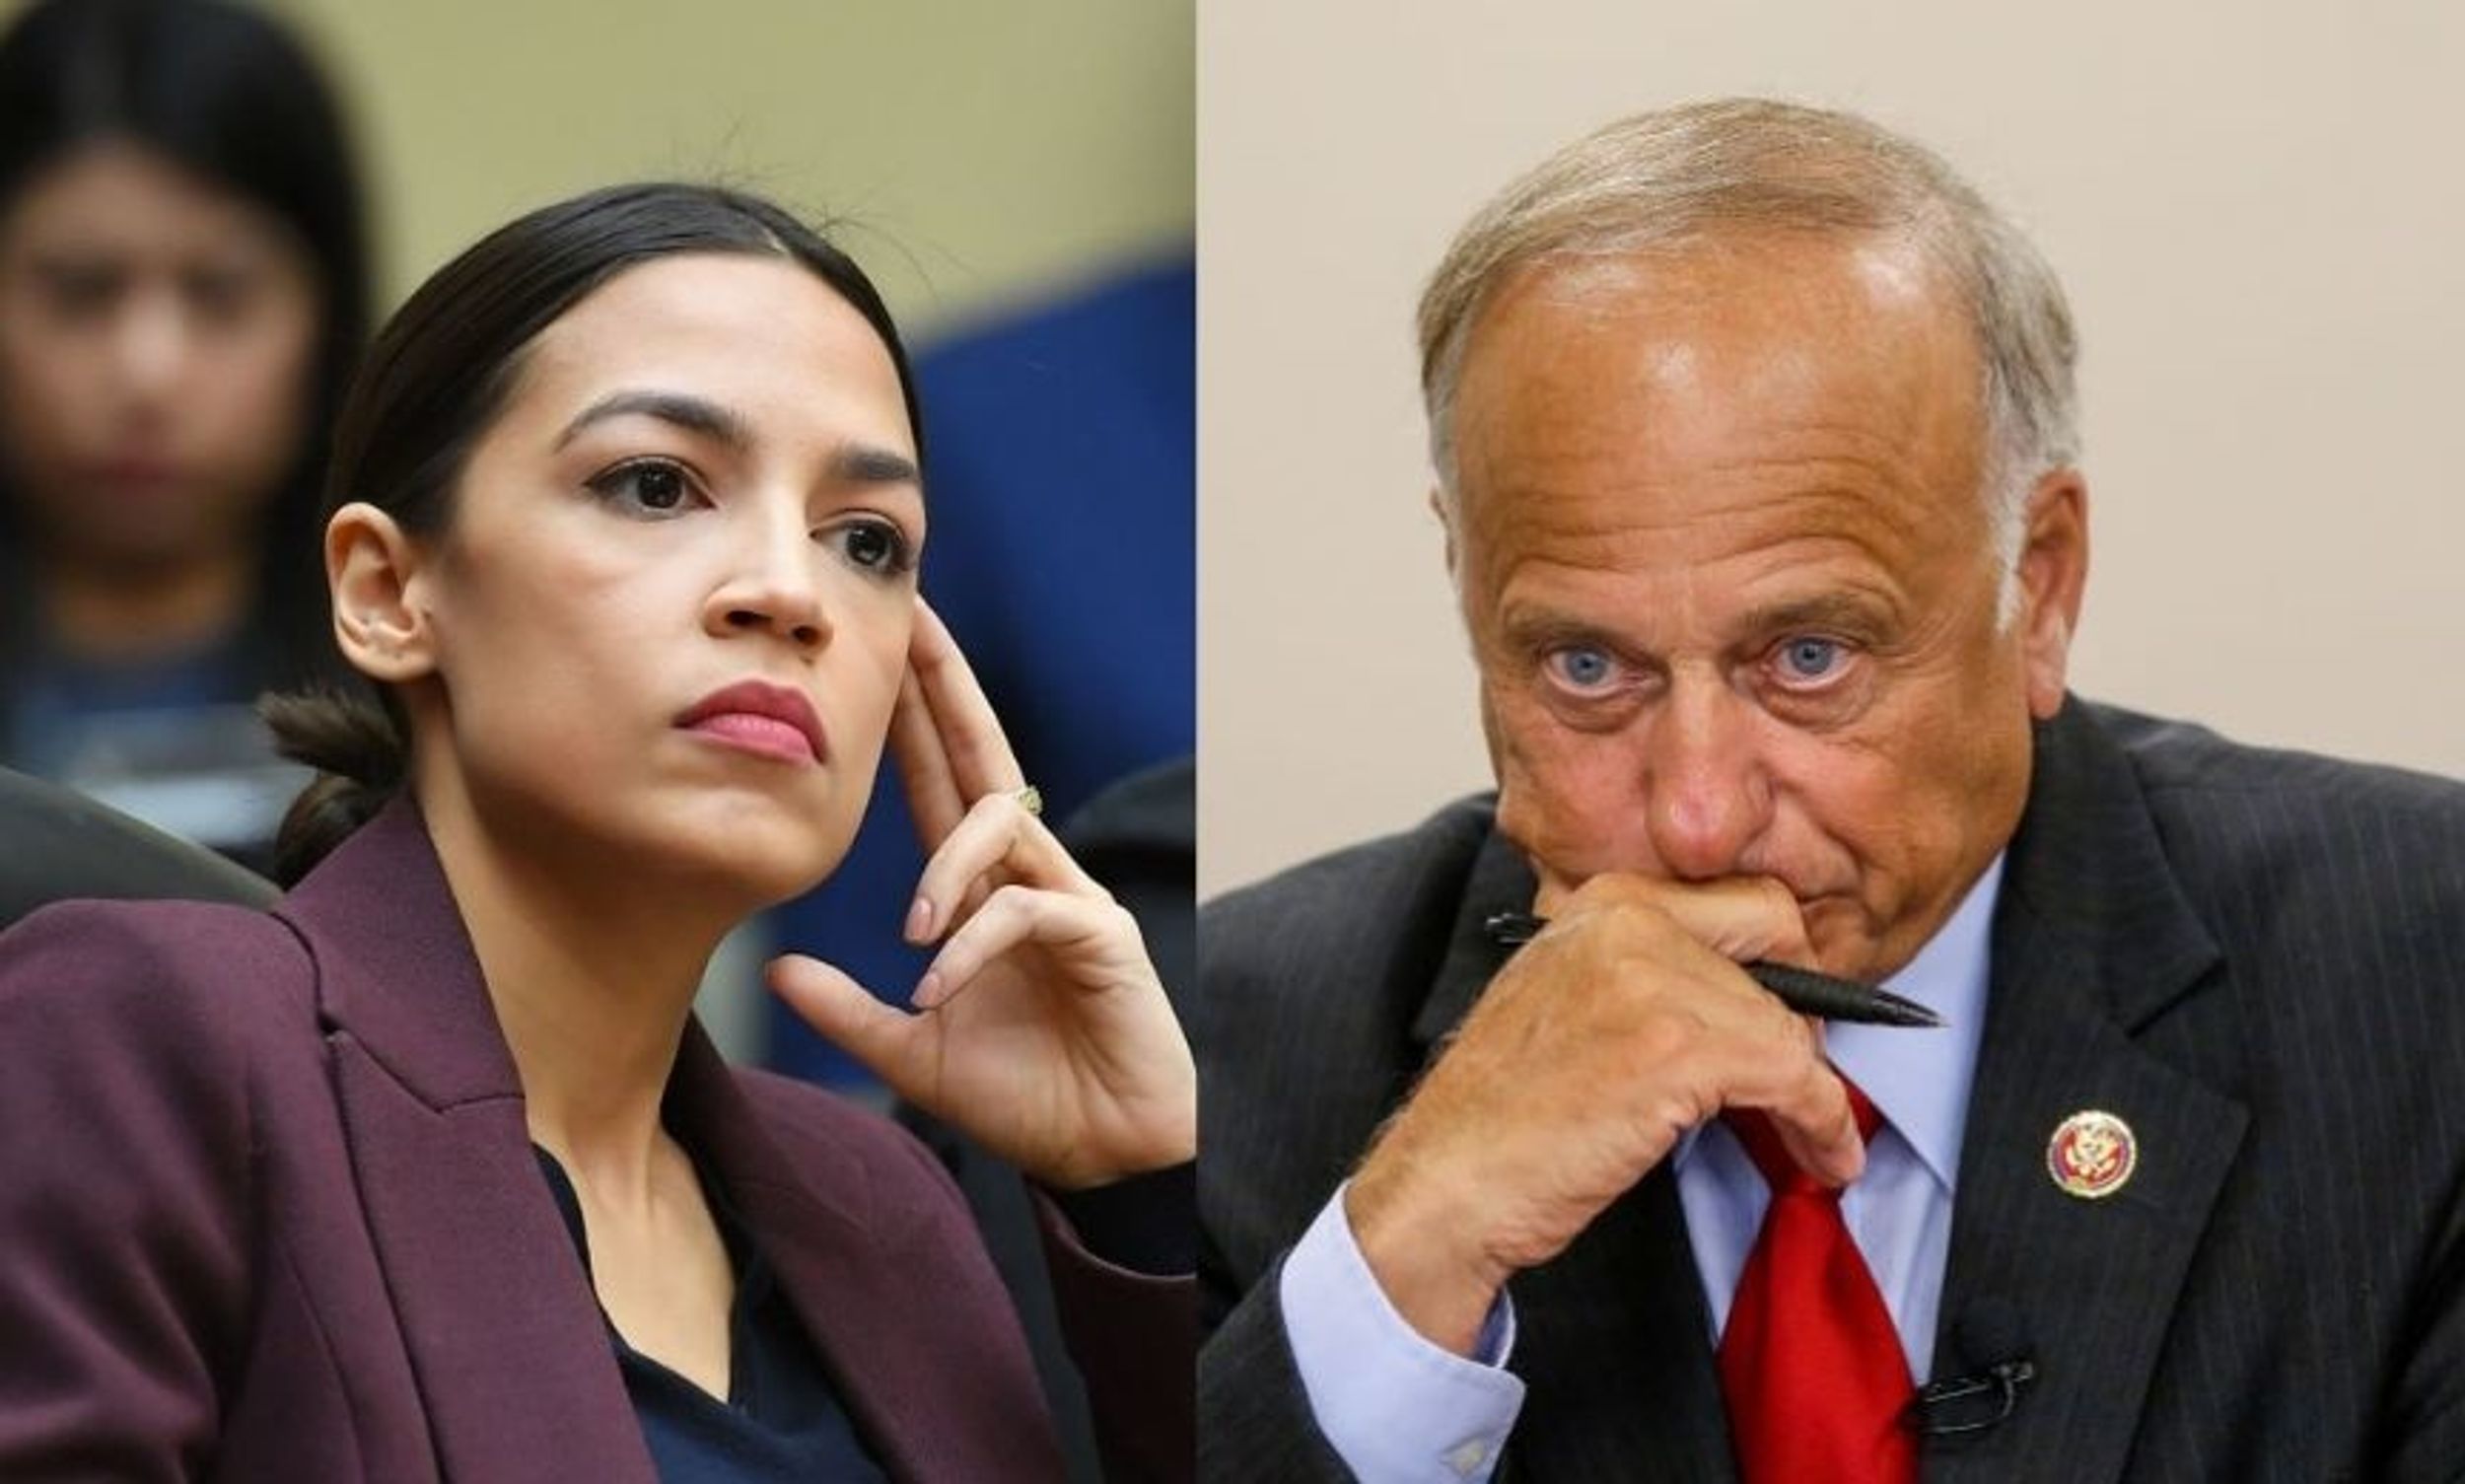 Alexandria Ocasio-Cortez Slams Rep. Steve King Over Video Of Him Drinking Water From Detention Center Toilet Sink